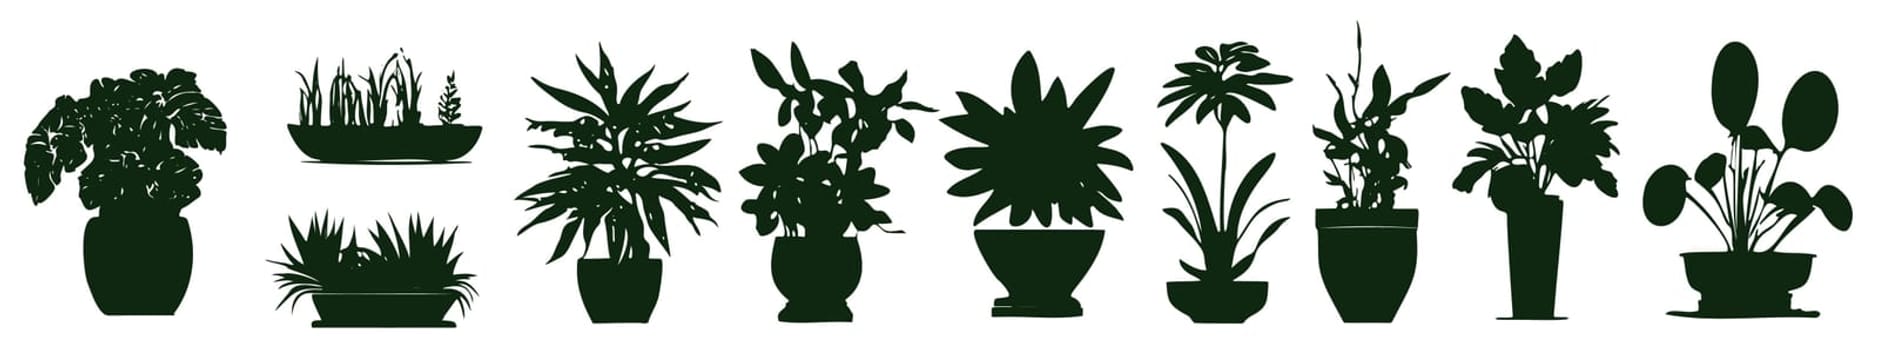 Set different potted houseplants silhouettes. Indoor flowers or plants